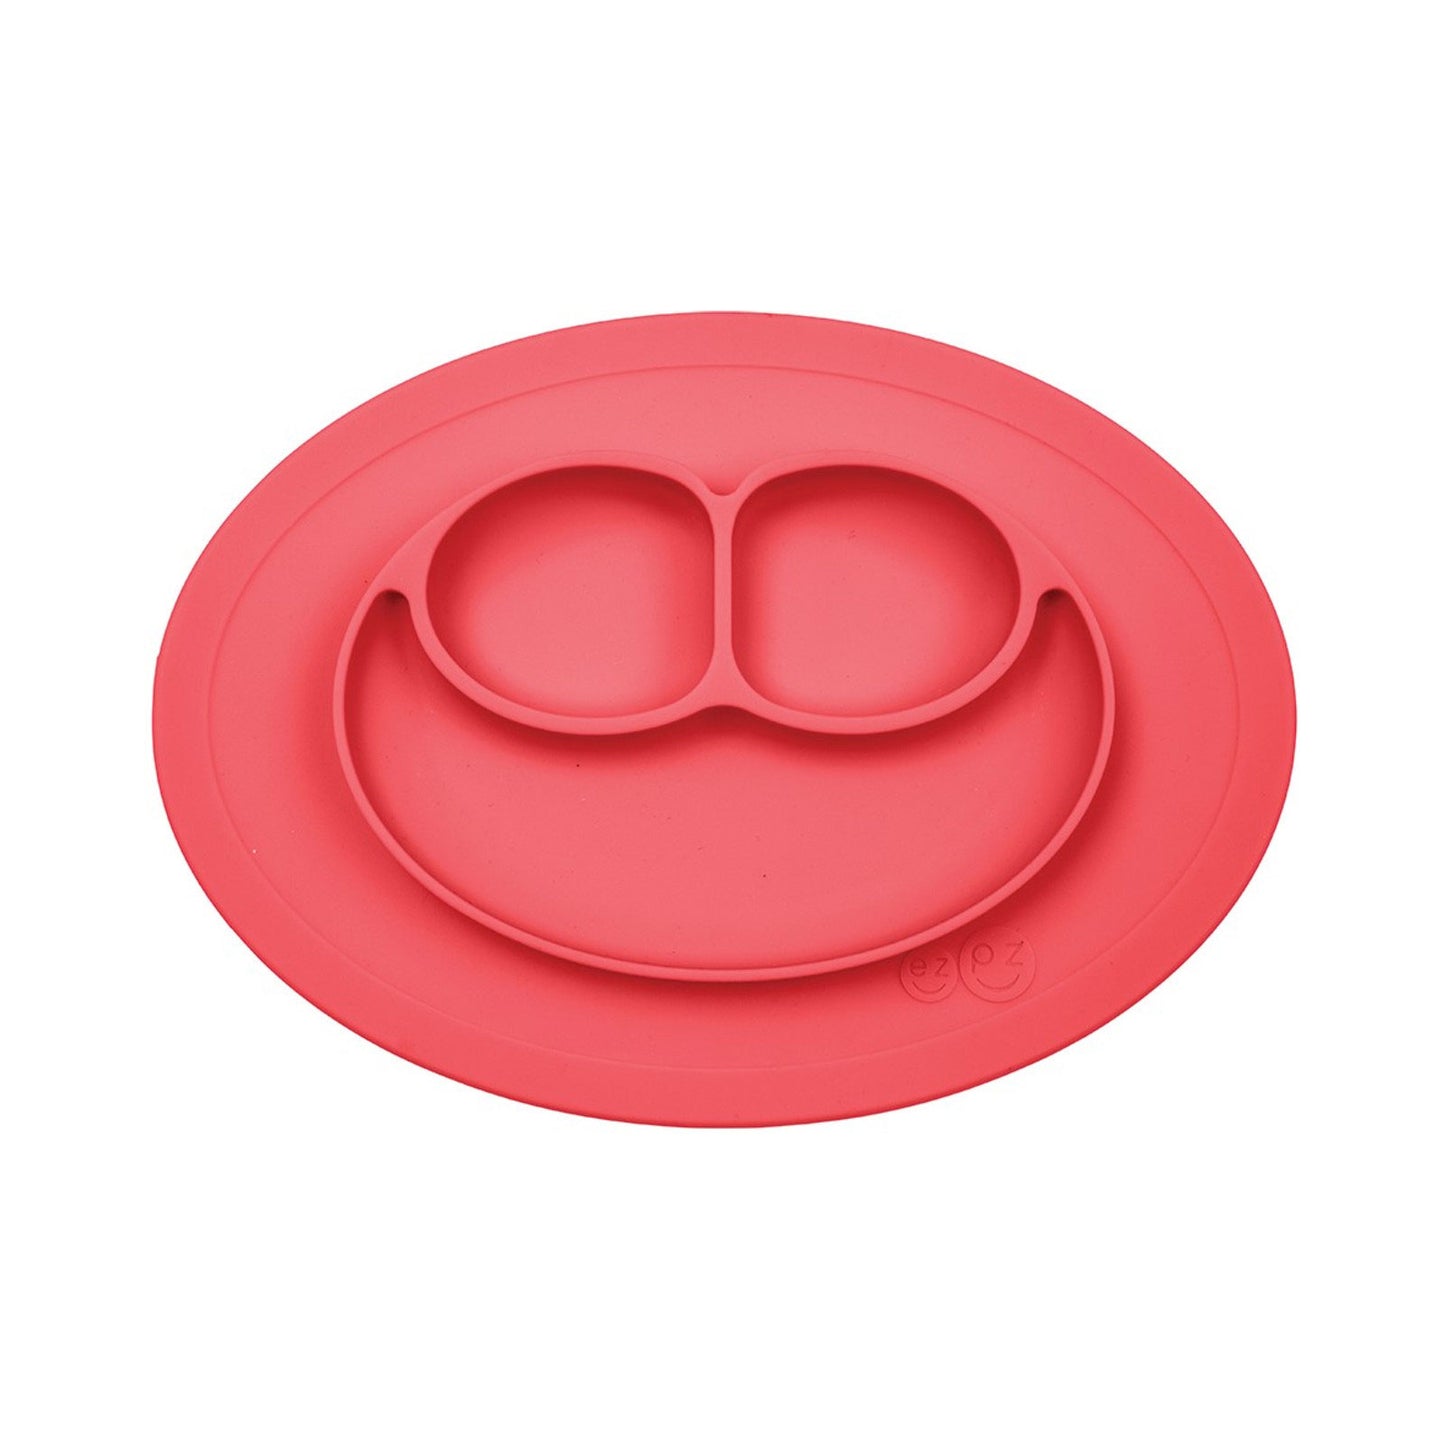 The EzPz Mini Mat is an all-in-one silicone placemat and plate that suctions to the table.